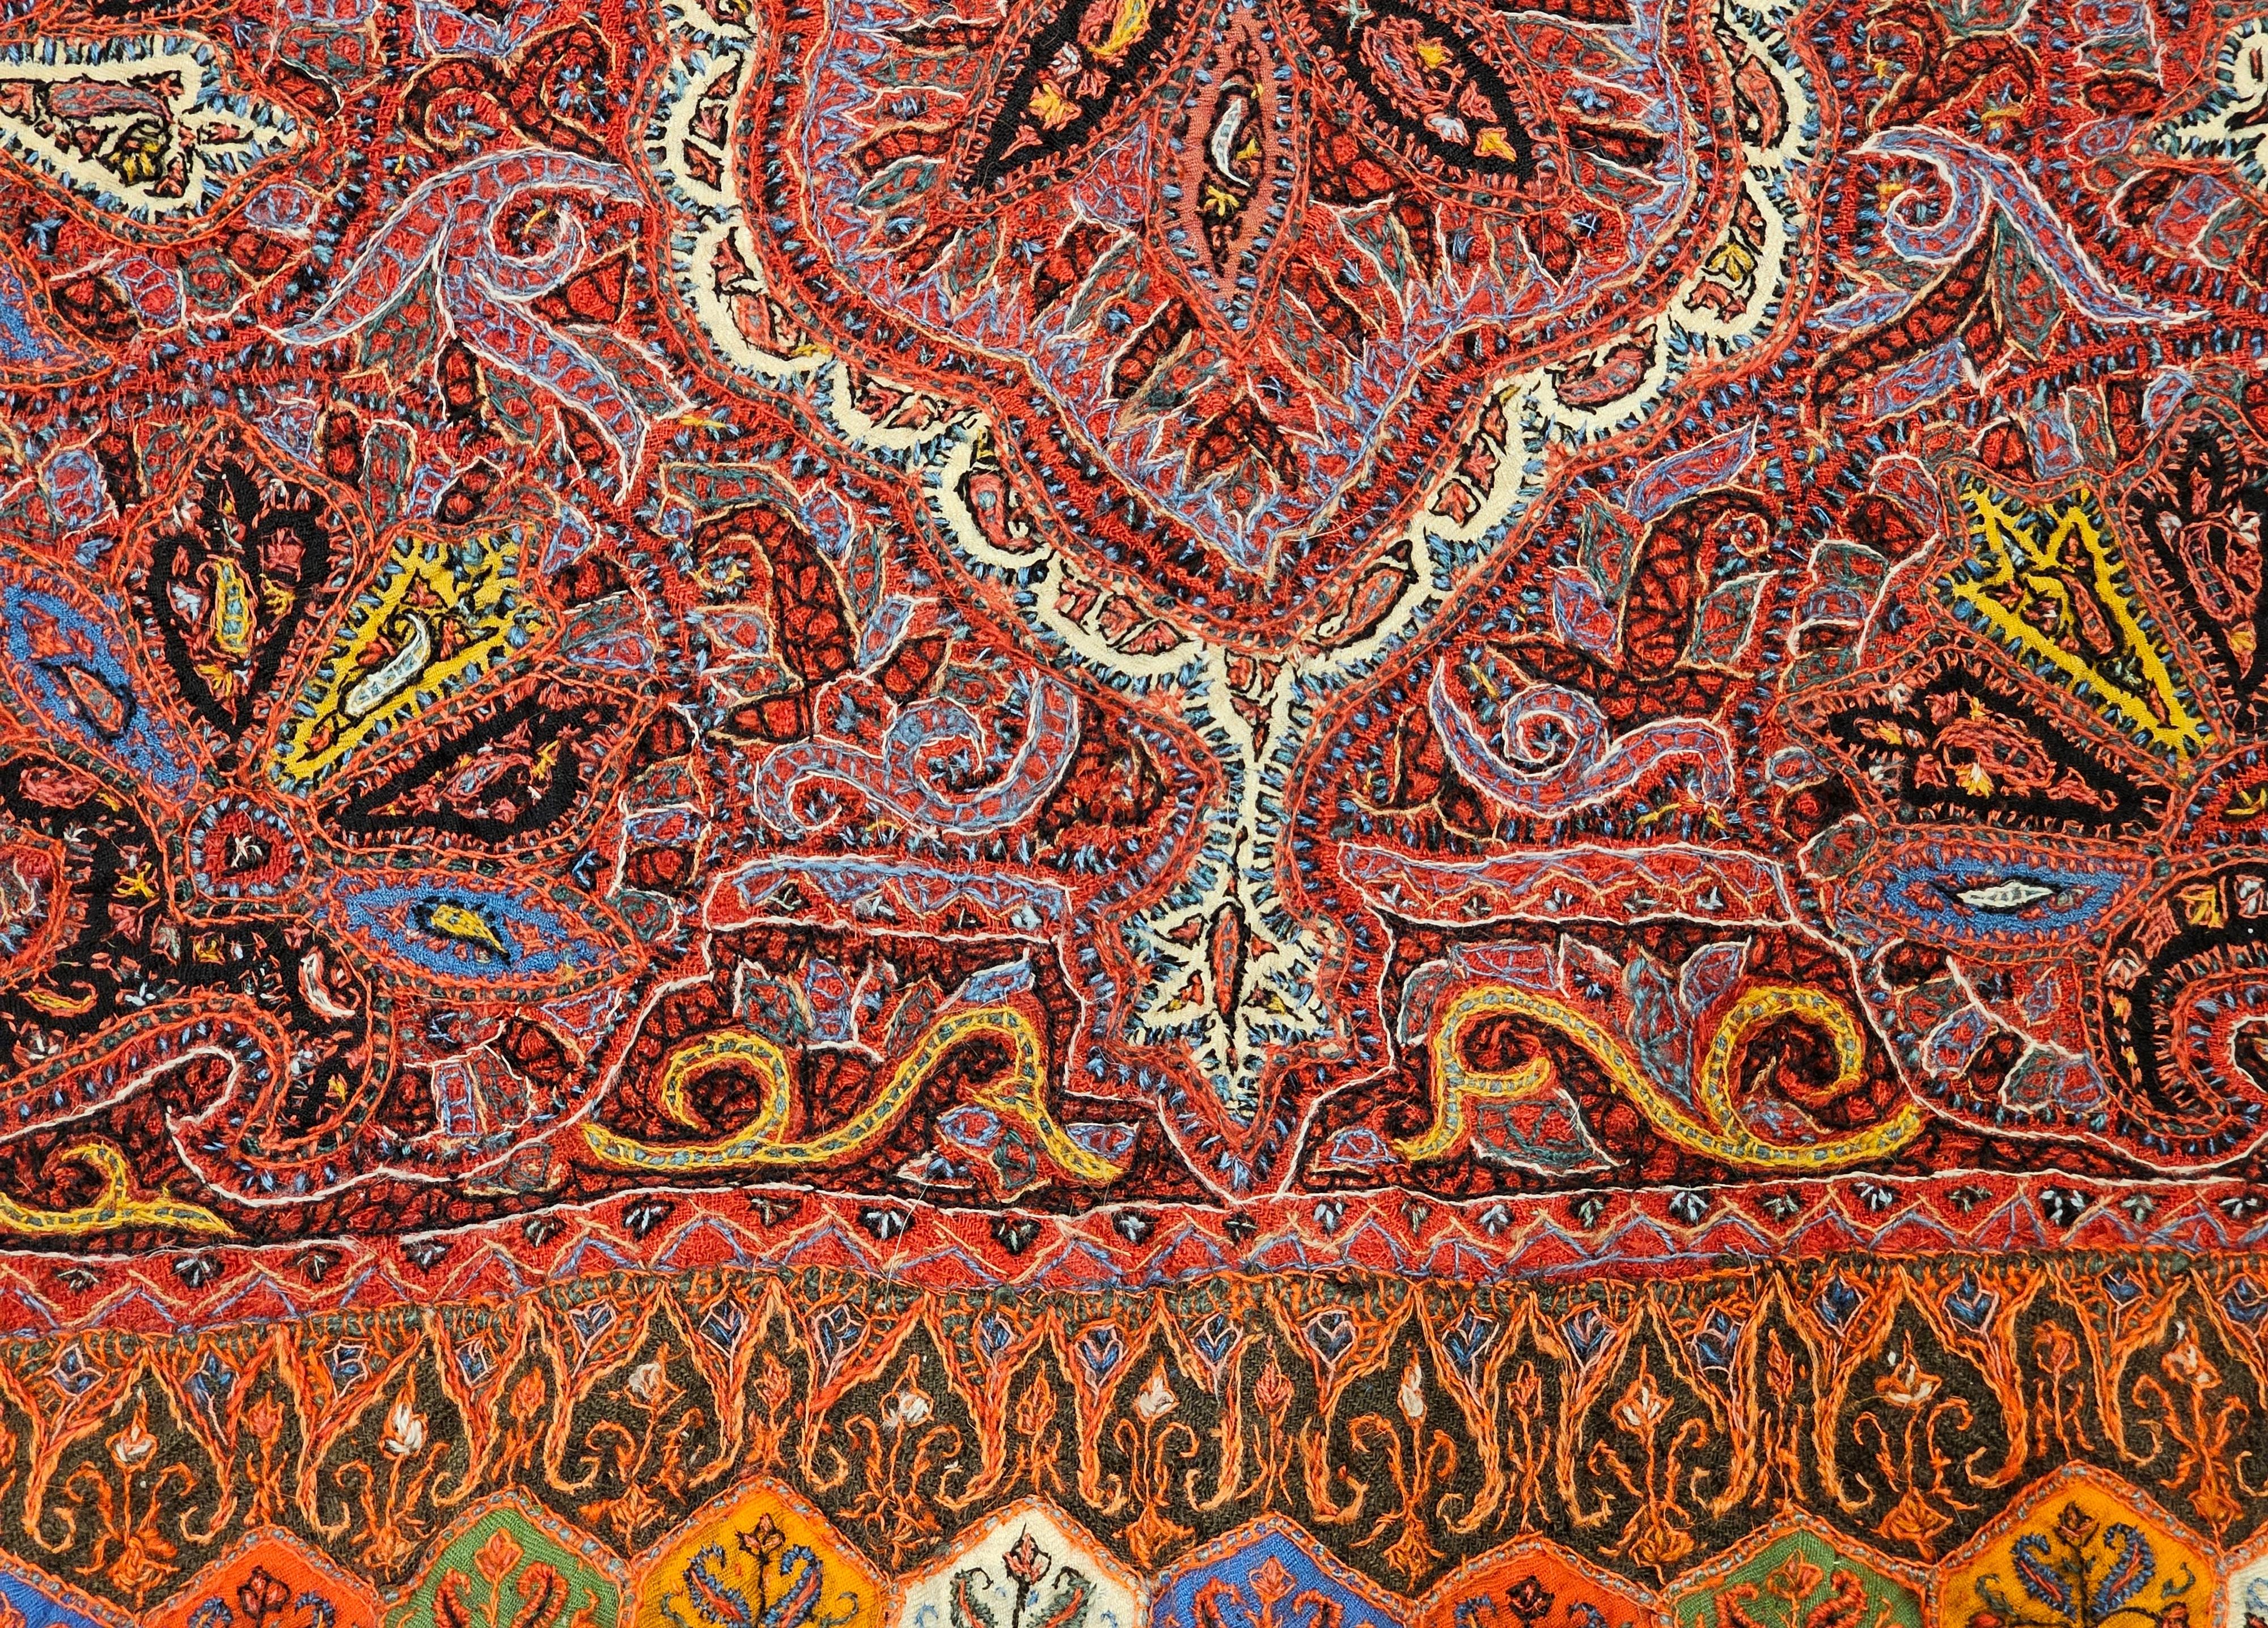 19th Century Hand Embroidered “Kashmiri Pieced Shawl” in Brick Red, Black, Blue For Sale 1